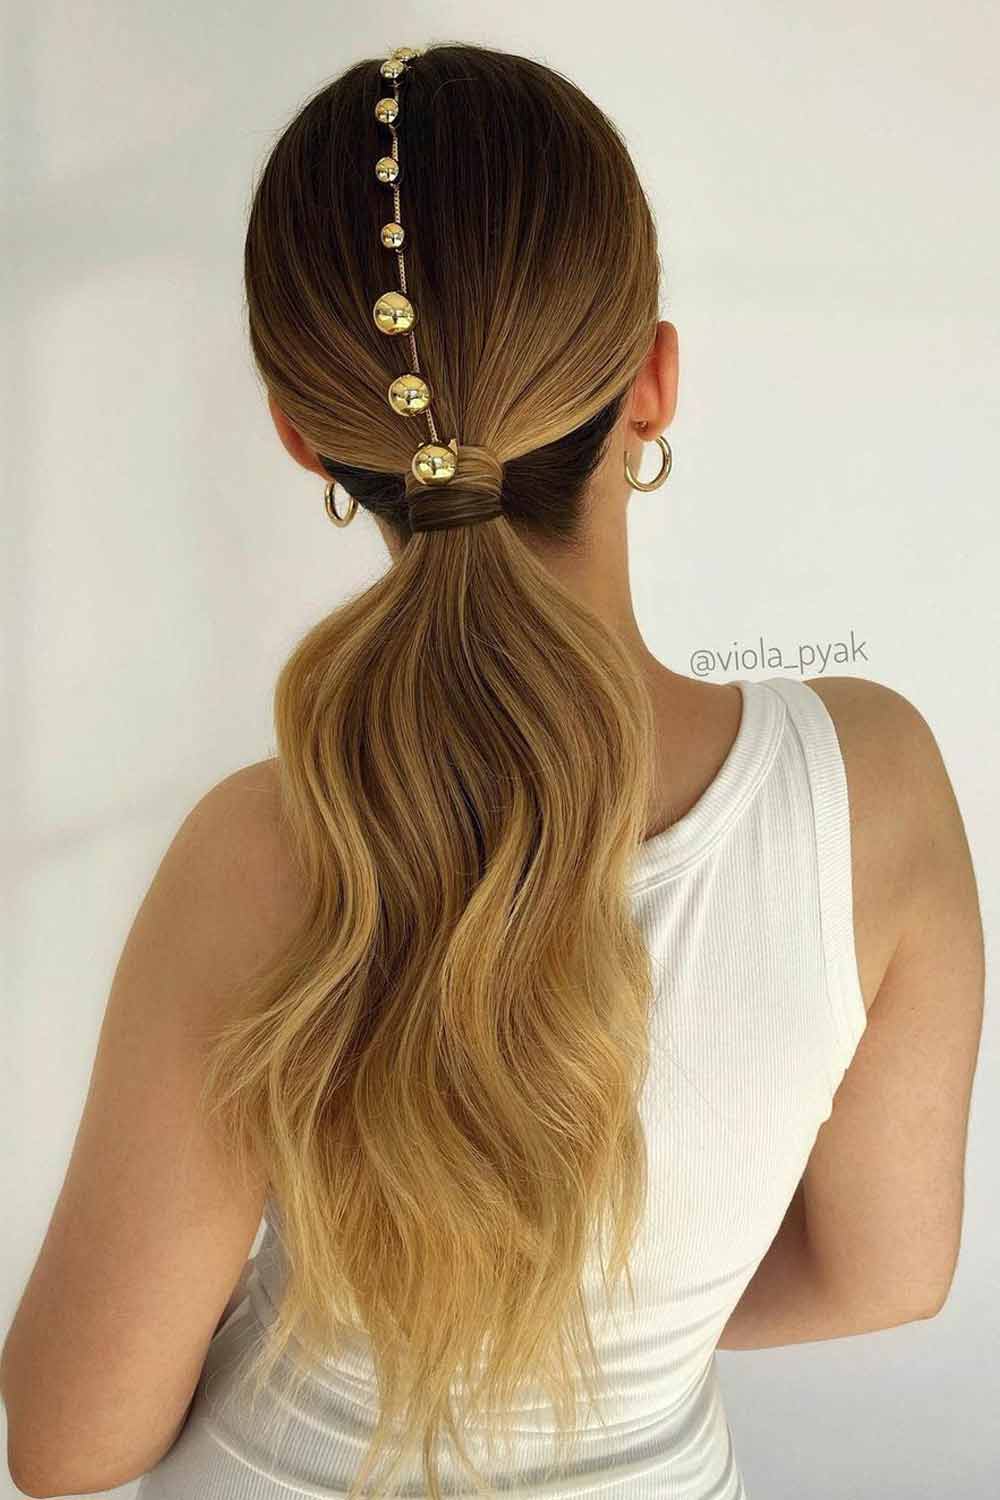 Ponytail Hairstyle with Accessory